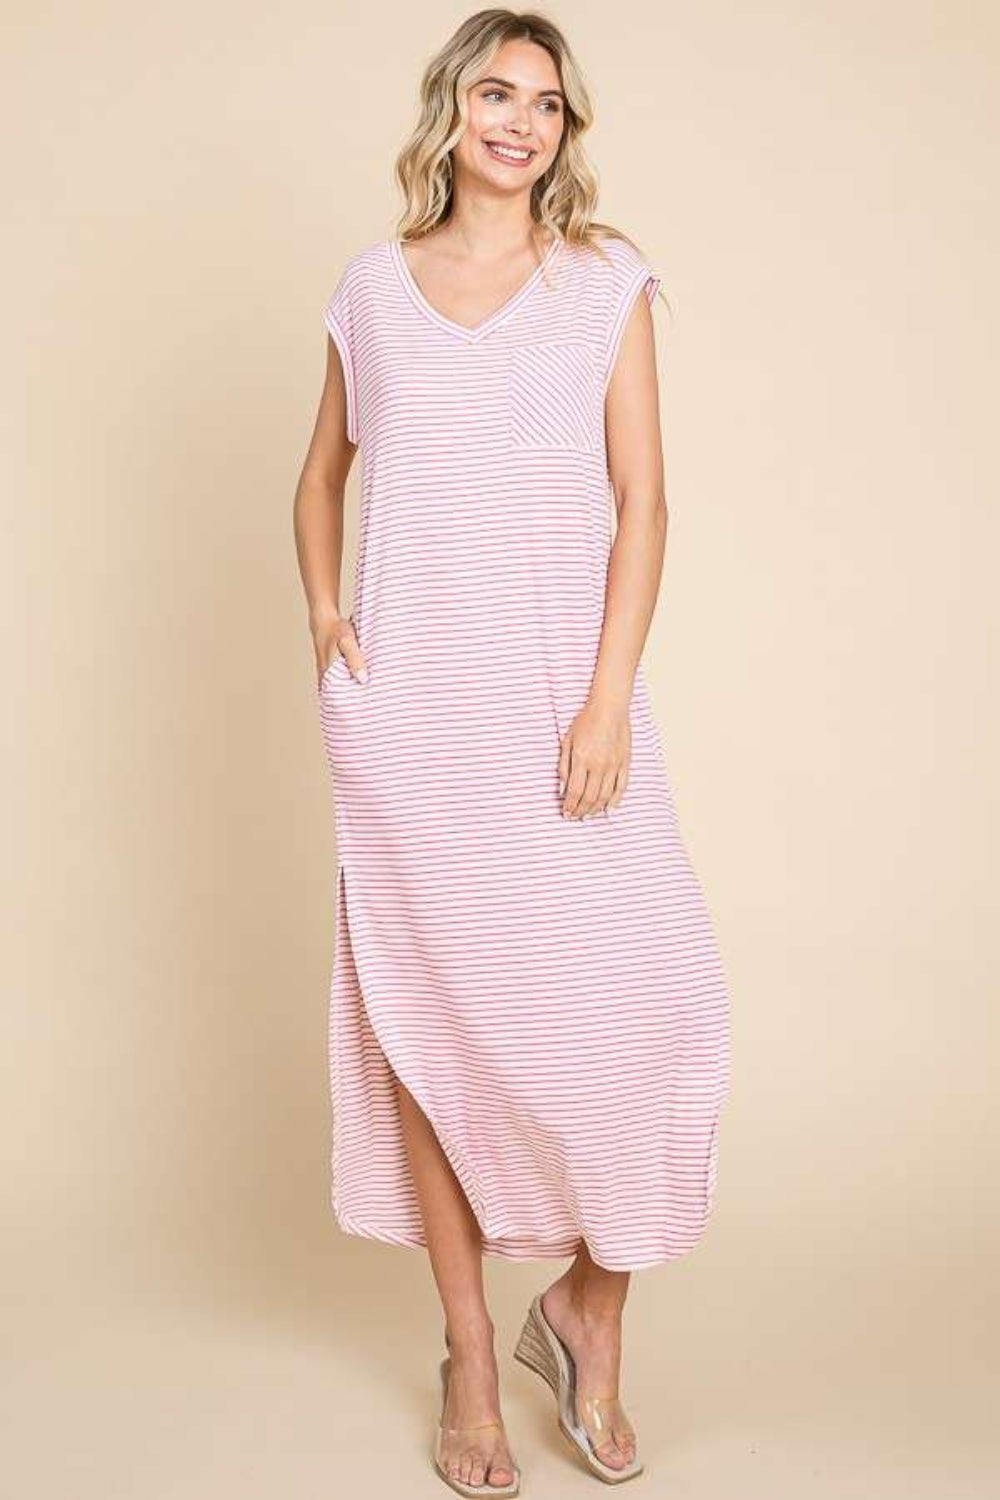 Pink Lady Dress with Pockets